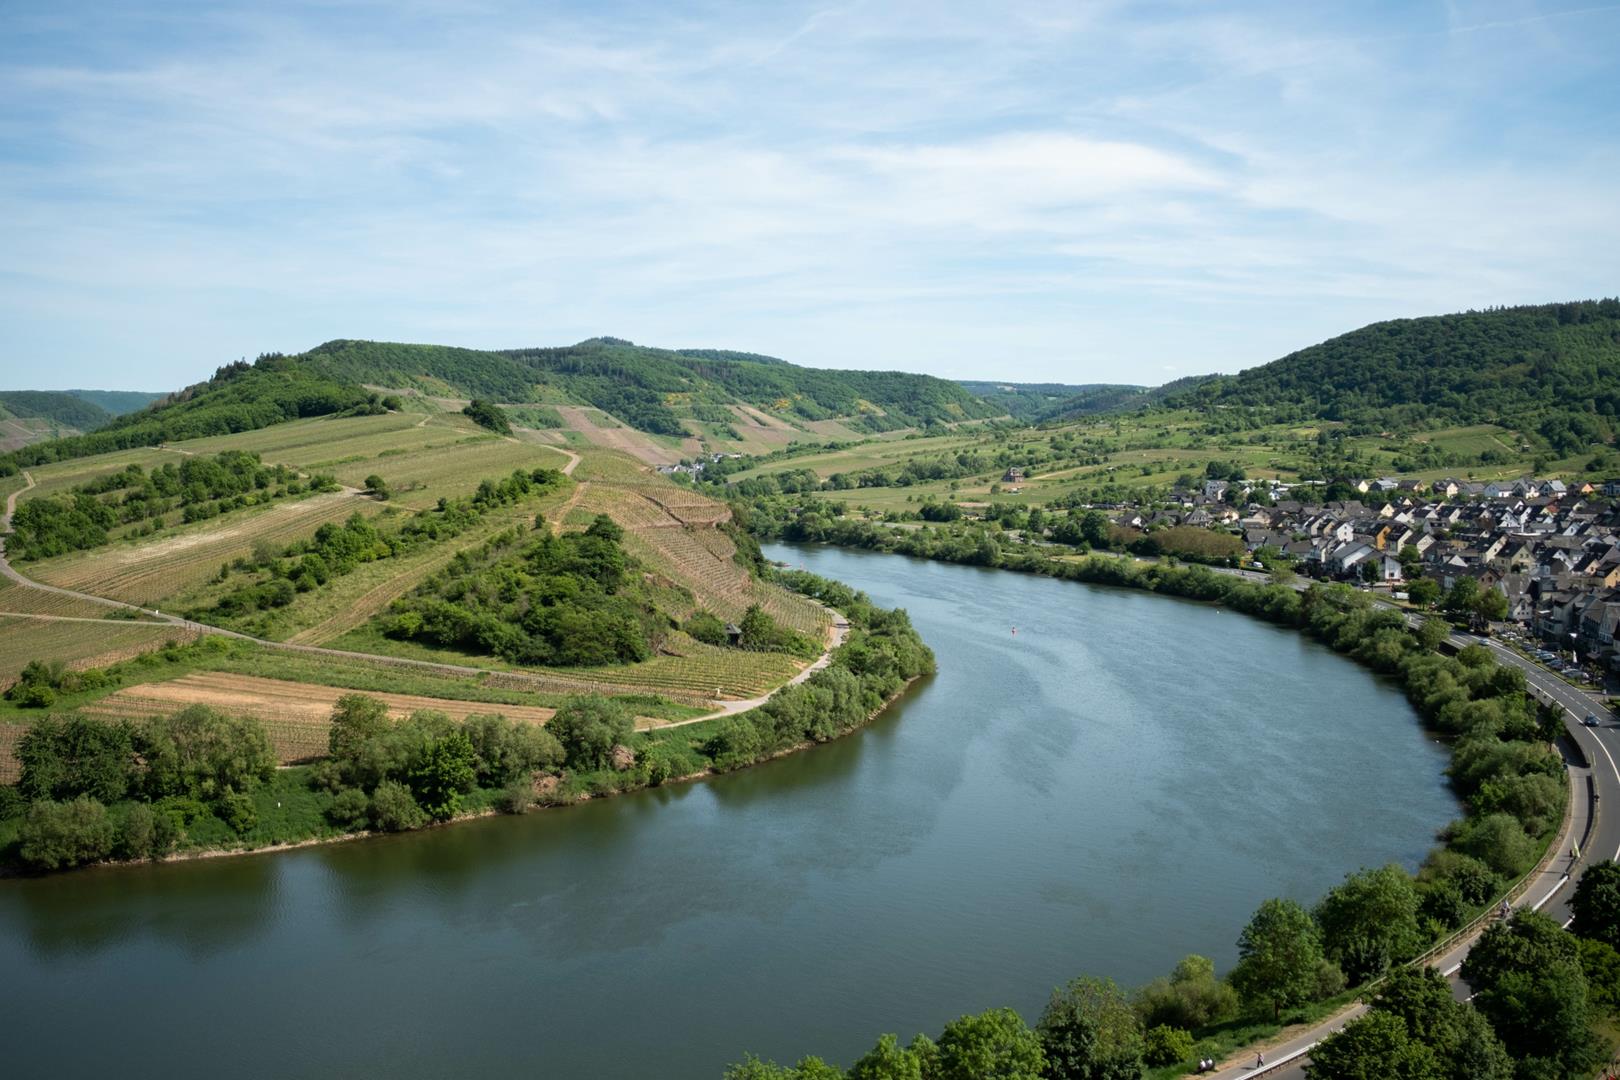 The Moselle Region7